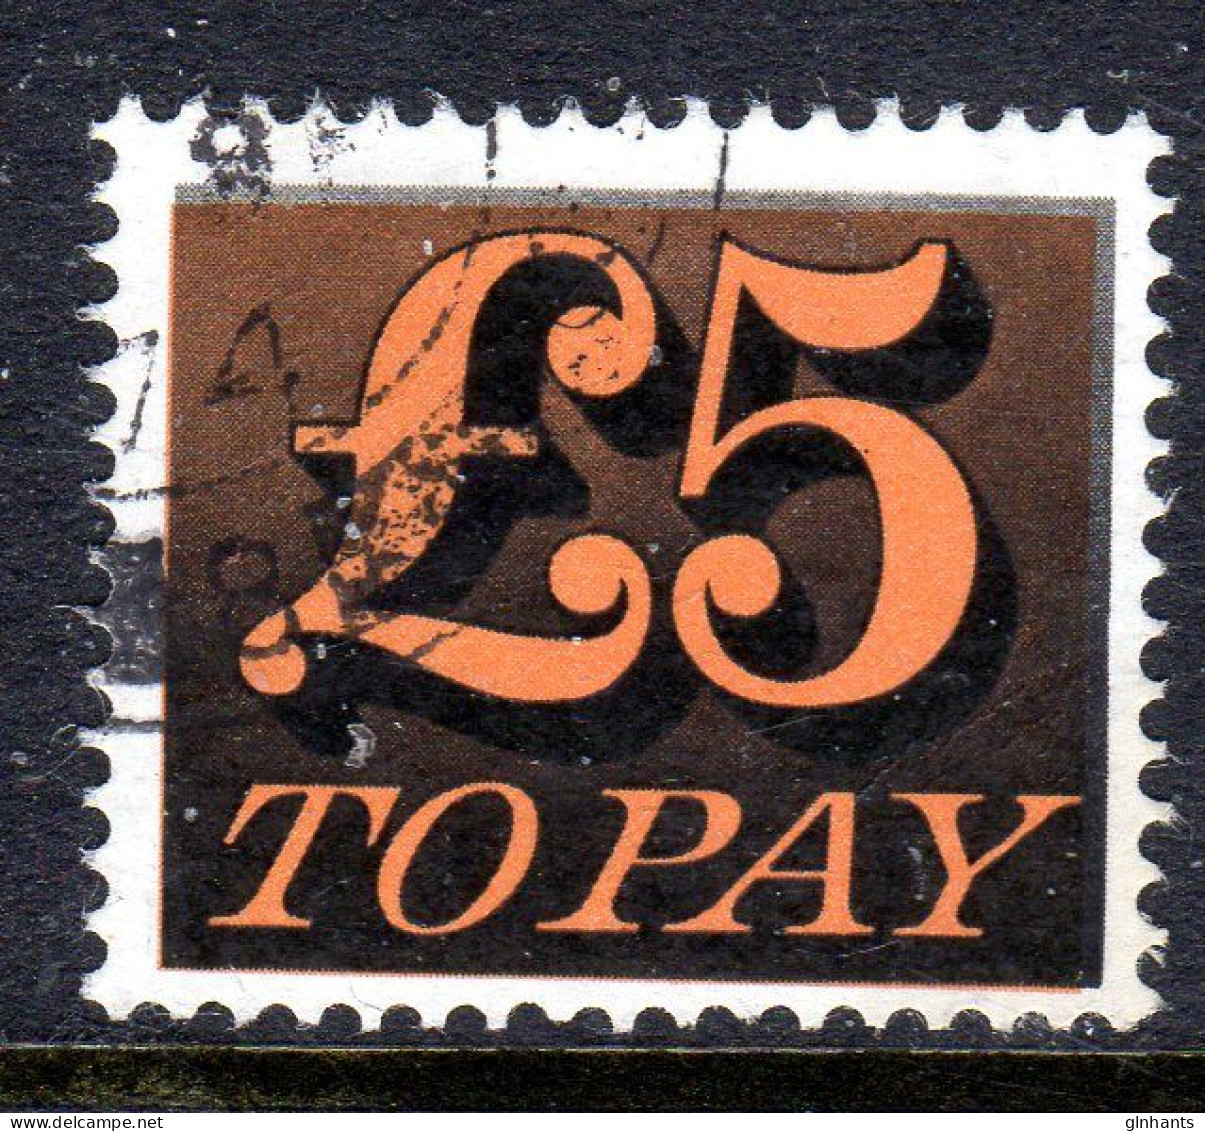 GREAT BRITAIN GB - 1970 POSTAGE DUE £5 STAMP FINE USED SG D89 - Taxe